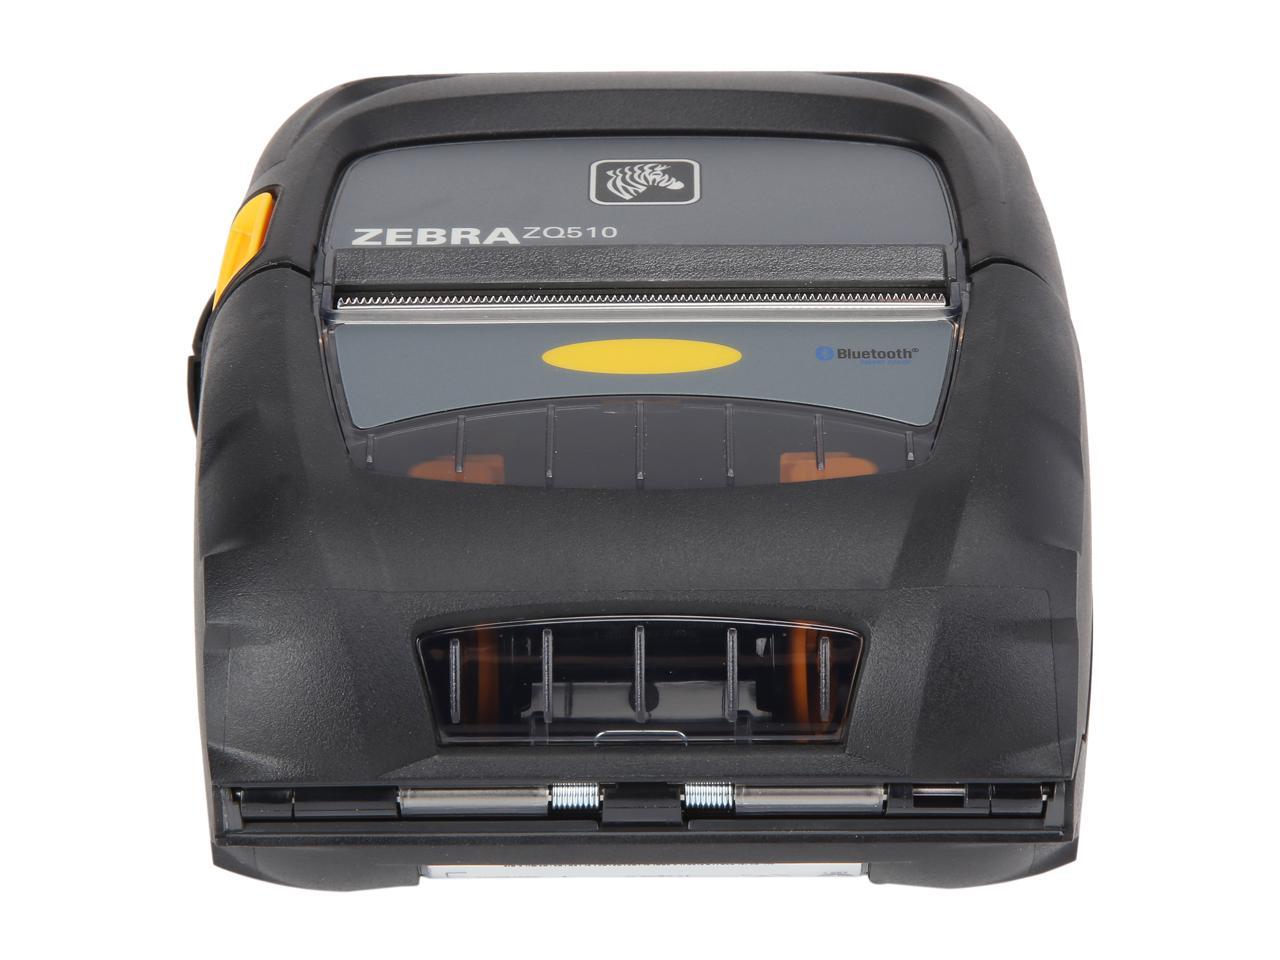 Zebra Zq510 3 Mobile Direct Thermal Receipt And Label Printer 203 Dpi Bluetooth 40 Linered 1784